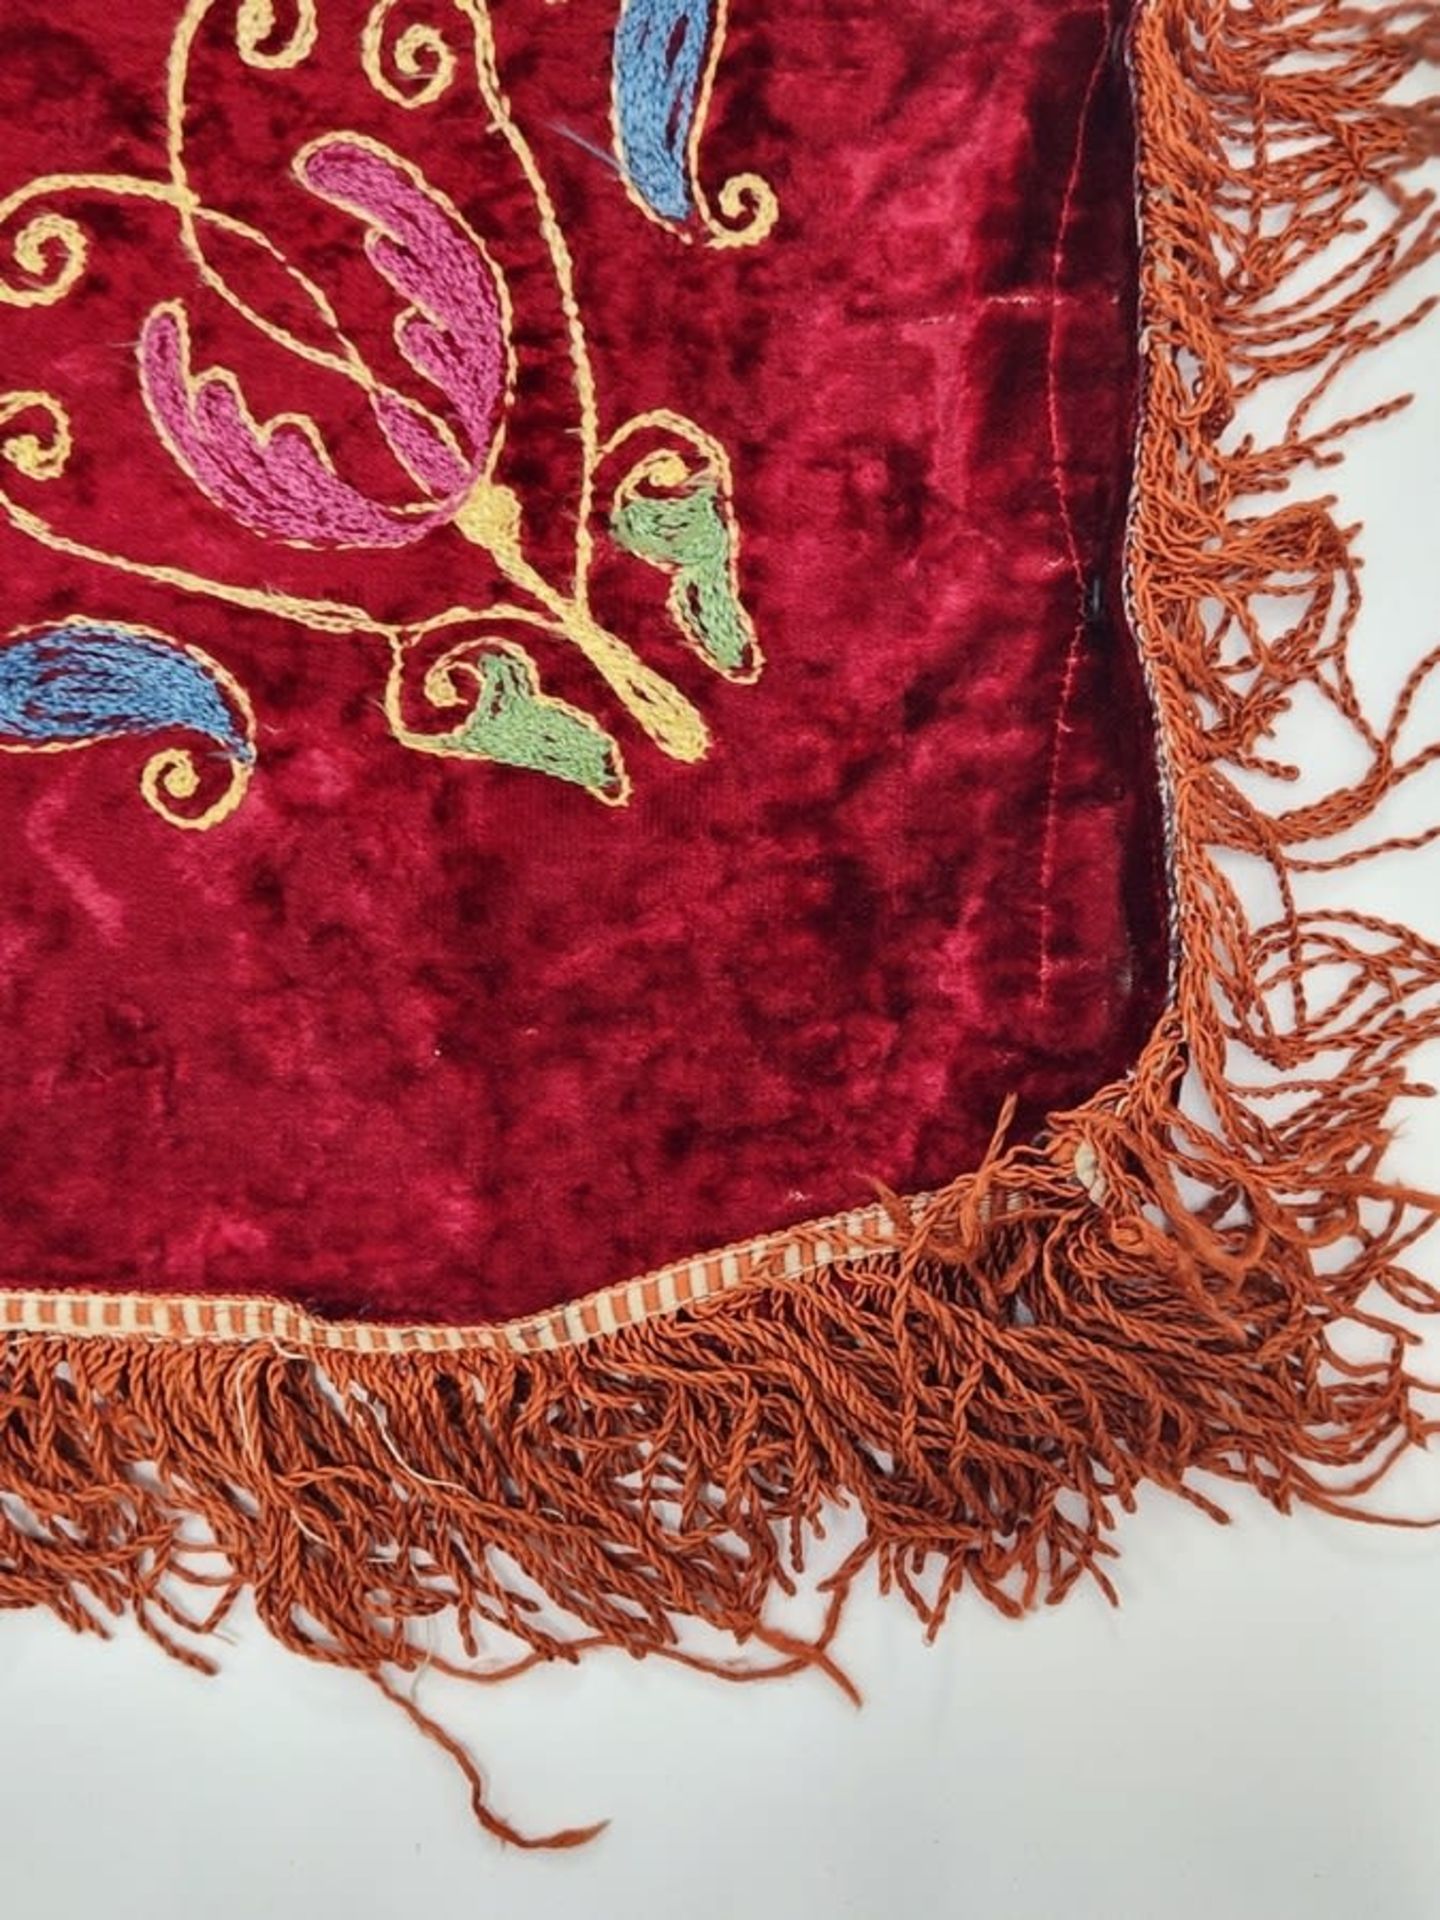 A Torah scroll coat, decorated with cotton thread weaving on red velvet and red fabric strands, - Image 3 of 7